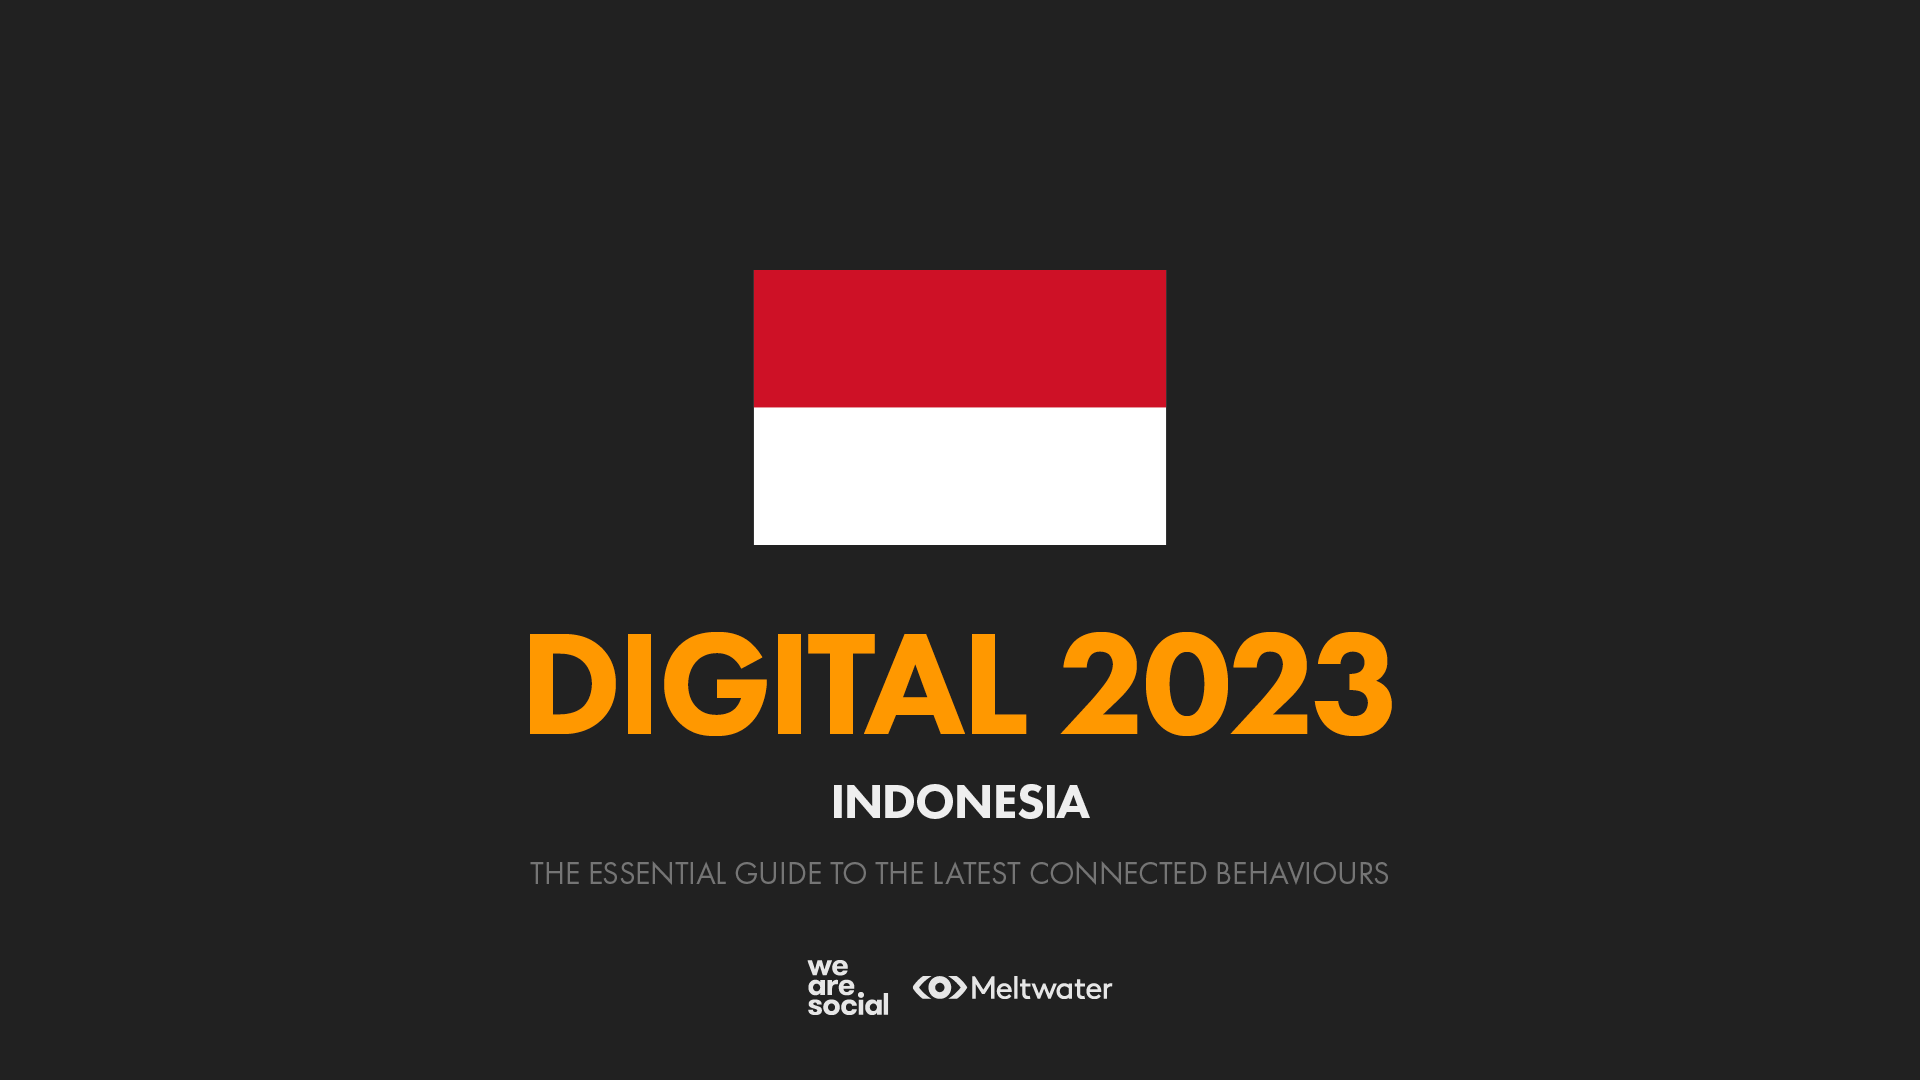 We Cannot Currently Register This Phone Number Twitter. Digital 2023: Indonesia — DataReportal – Global Digital Insights